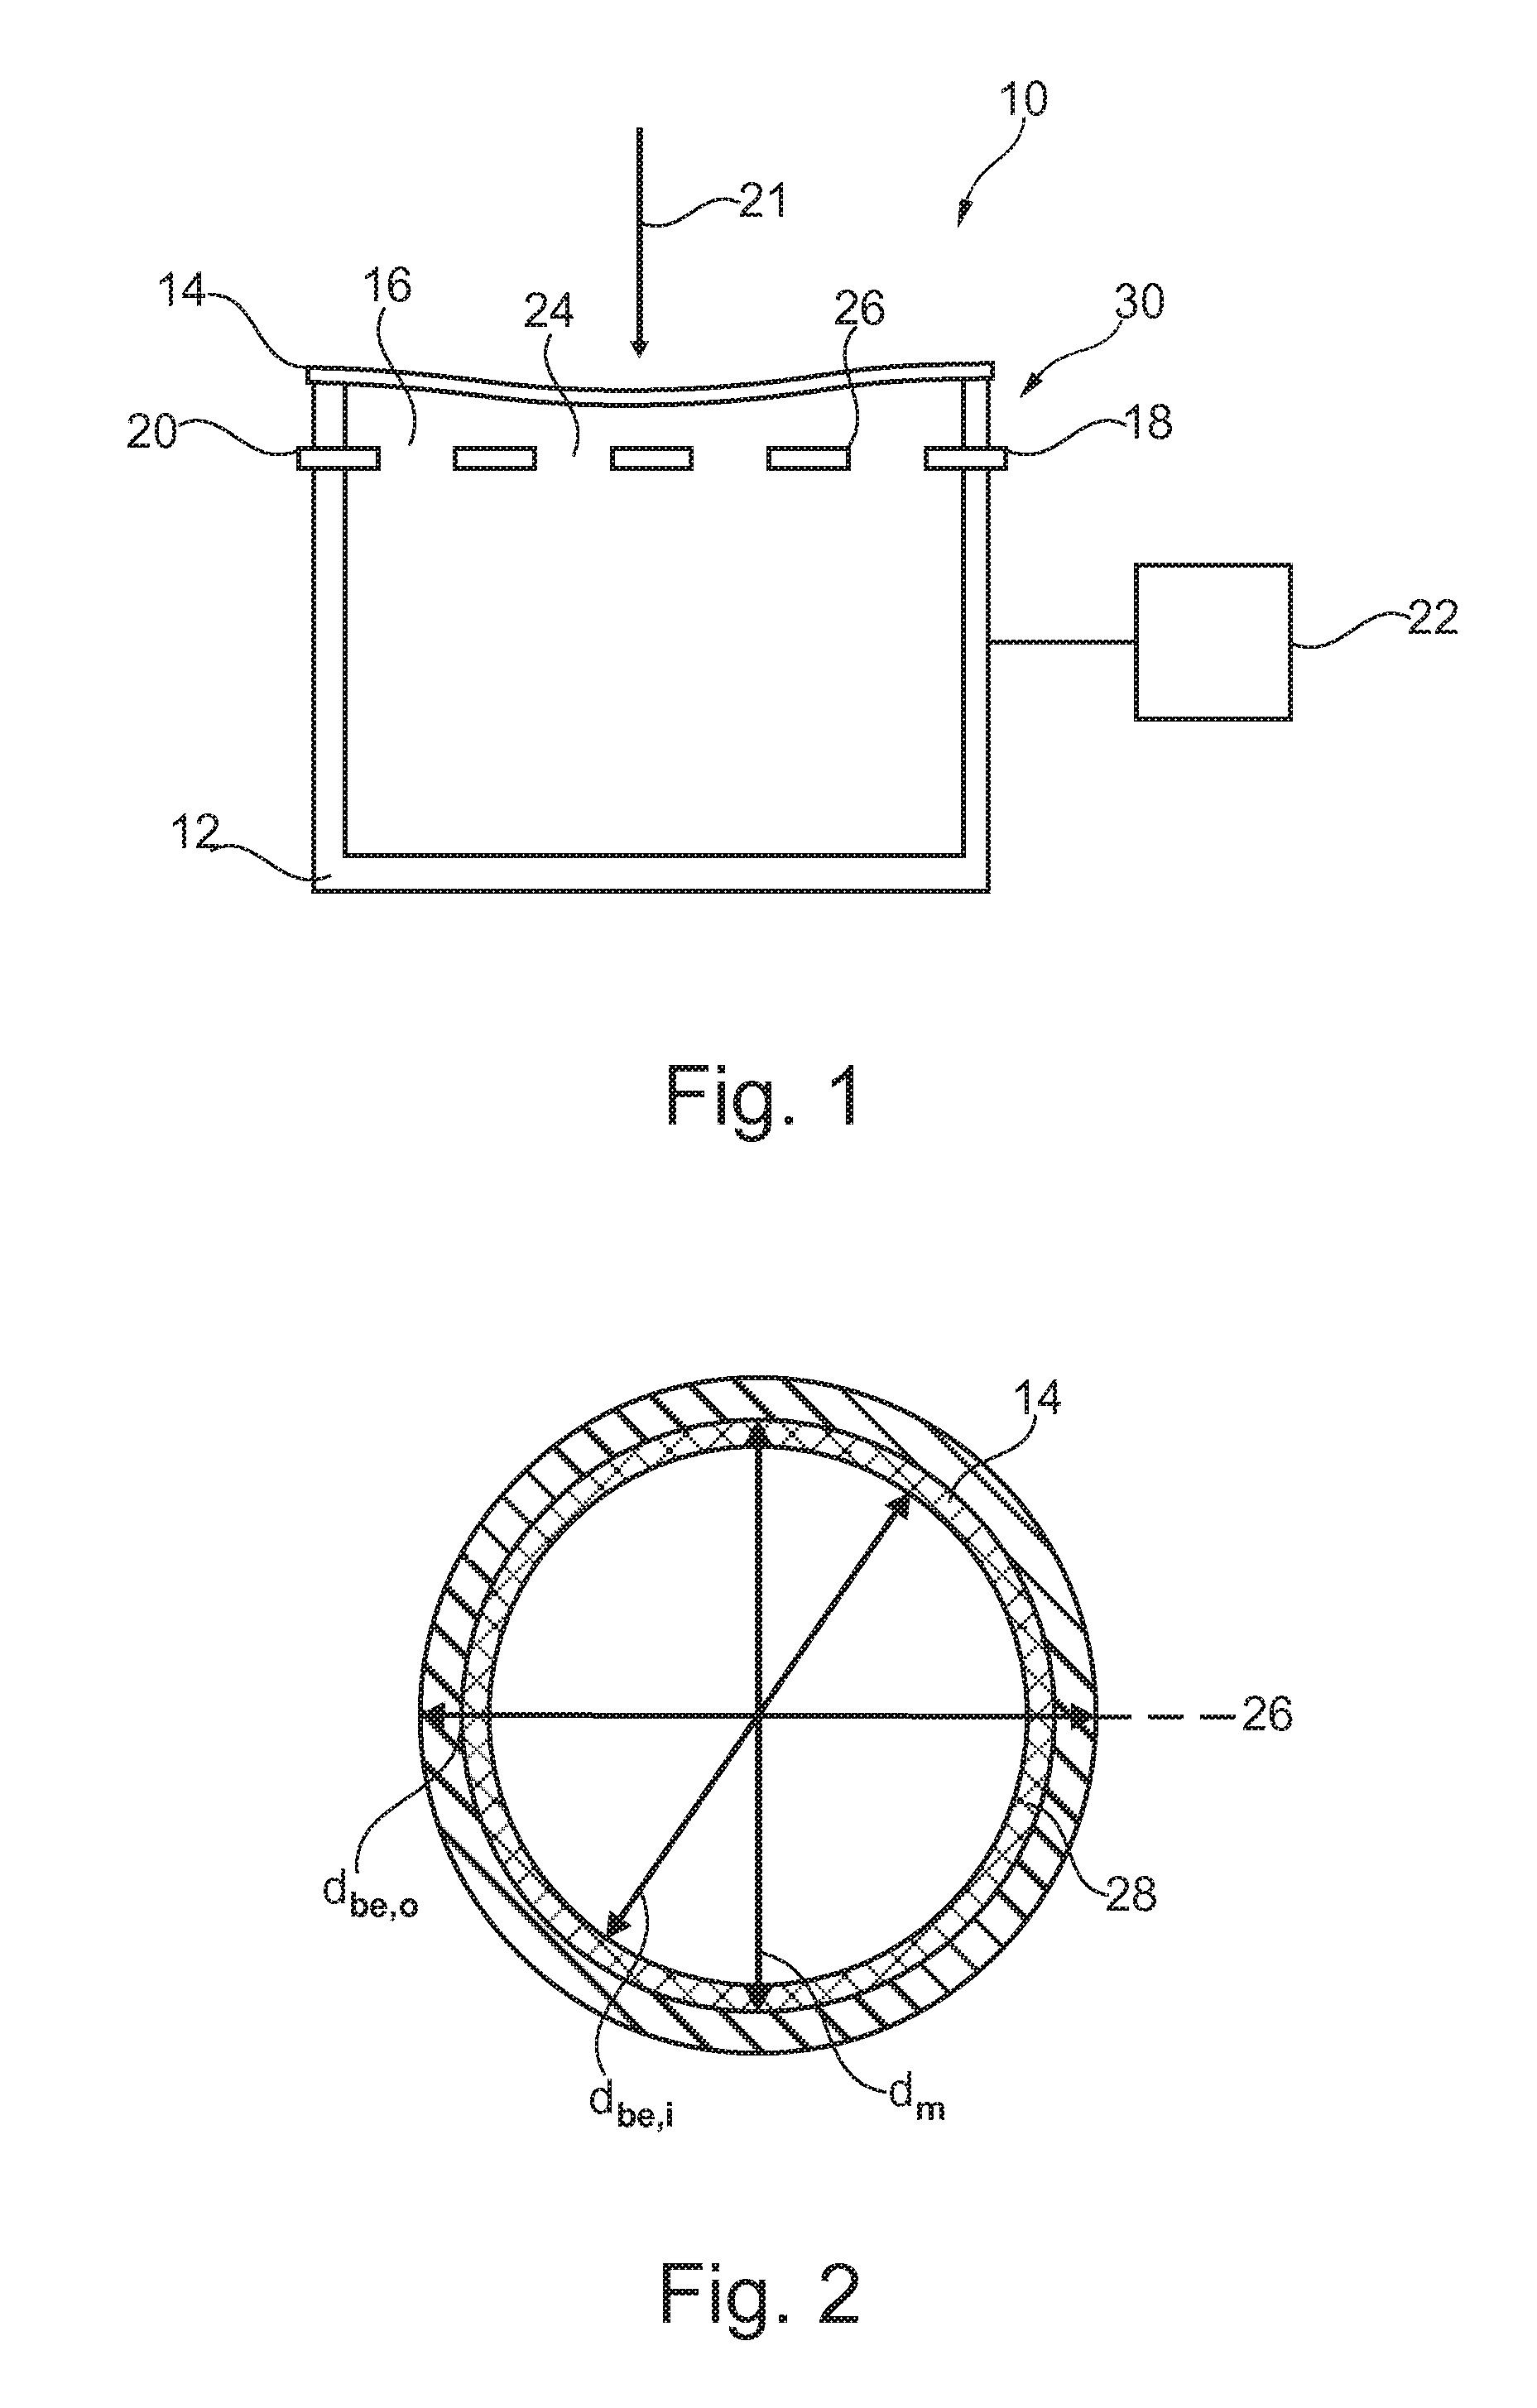 MEMS Transducer for an Audio Device